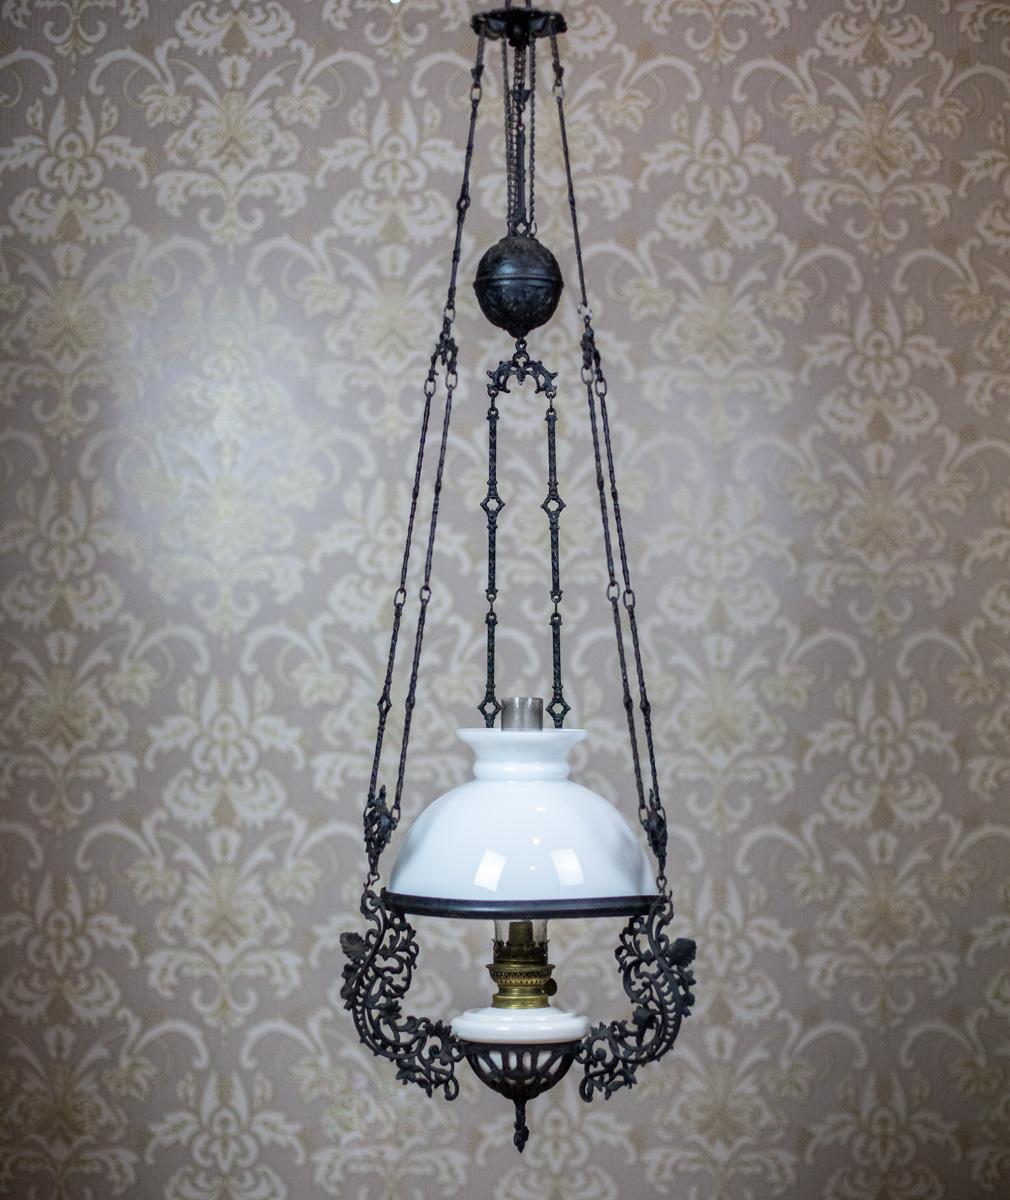 We present you a big, heavy hanging kerosene lamp from the late 19th century.
The lamp is made of cast iron. The font is ceramic, whereas the shade is made of milky glass.

This item is complete and in very good condition. The shade is undamaged.